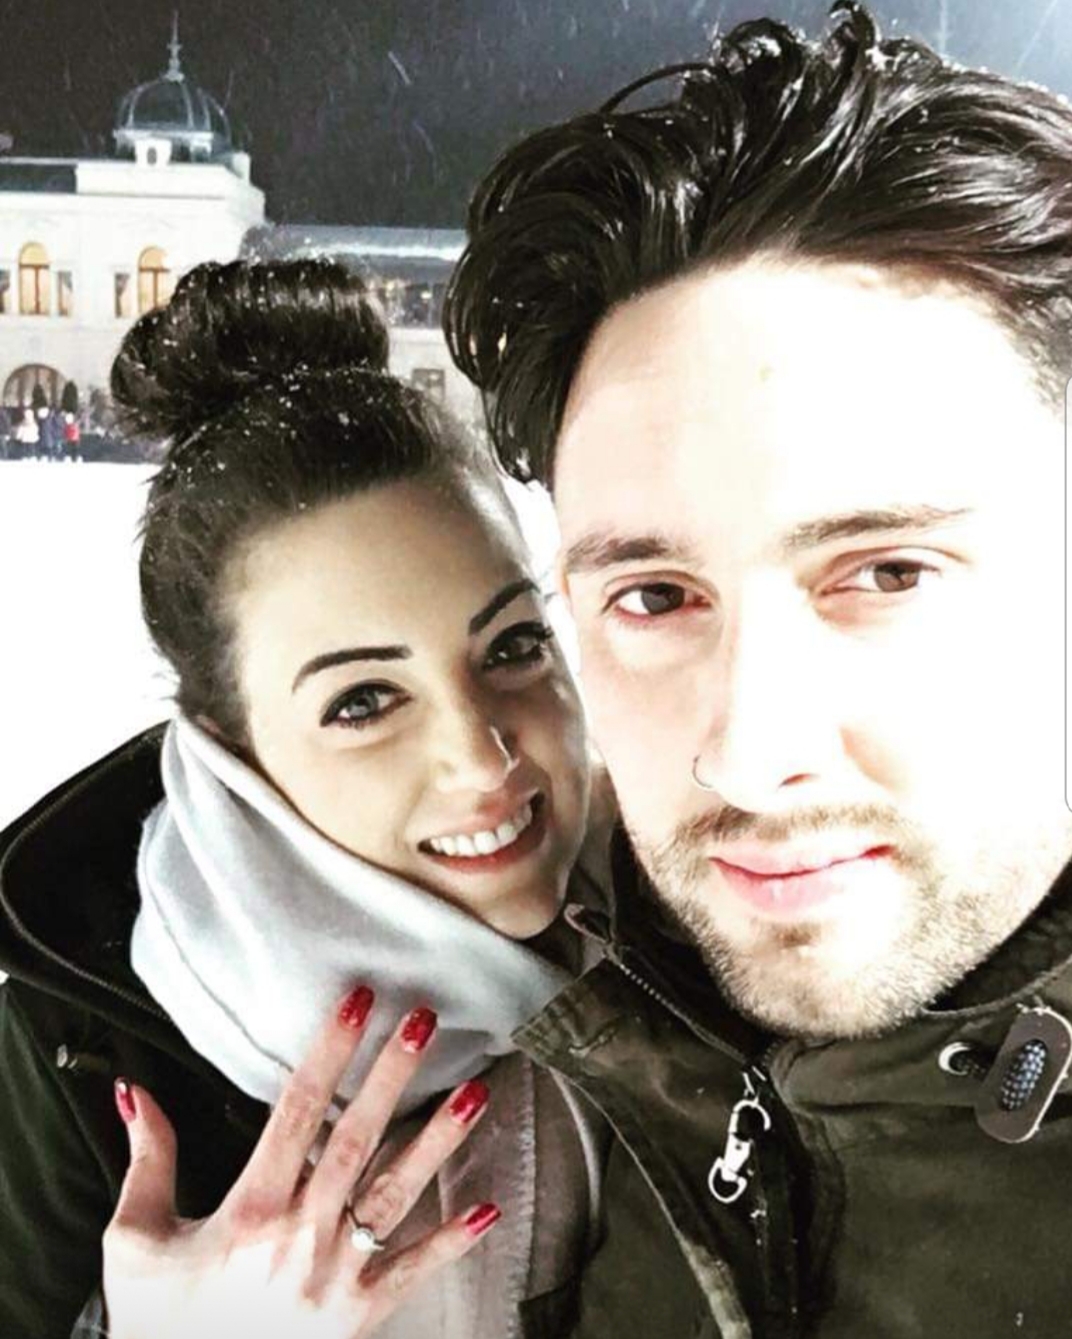 Emily poses with her engagement ring alongside Sam in the snow in Budapest